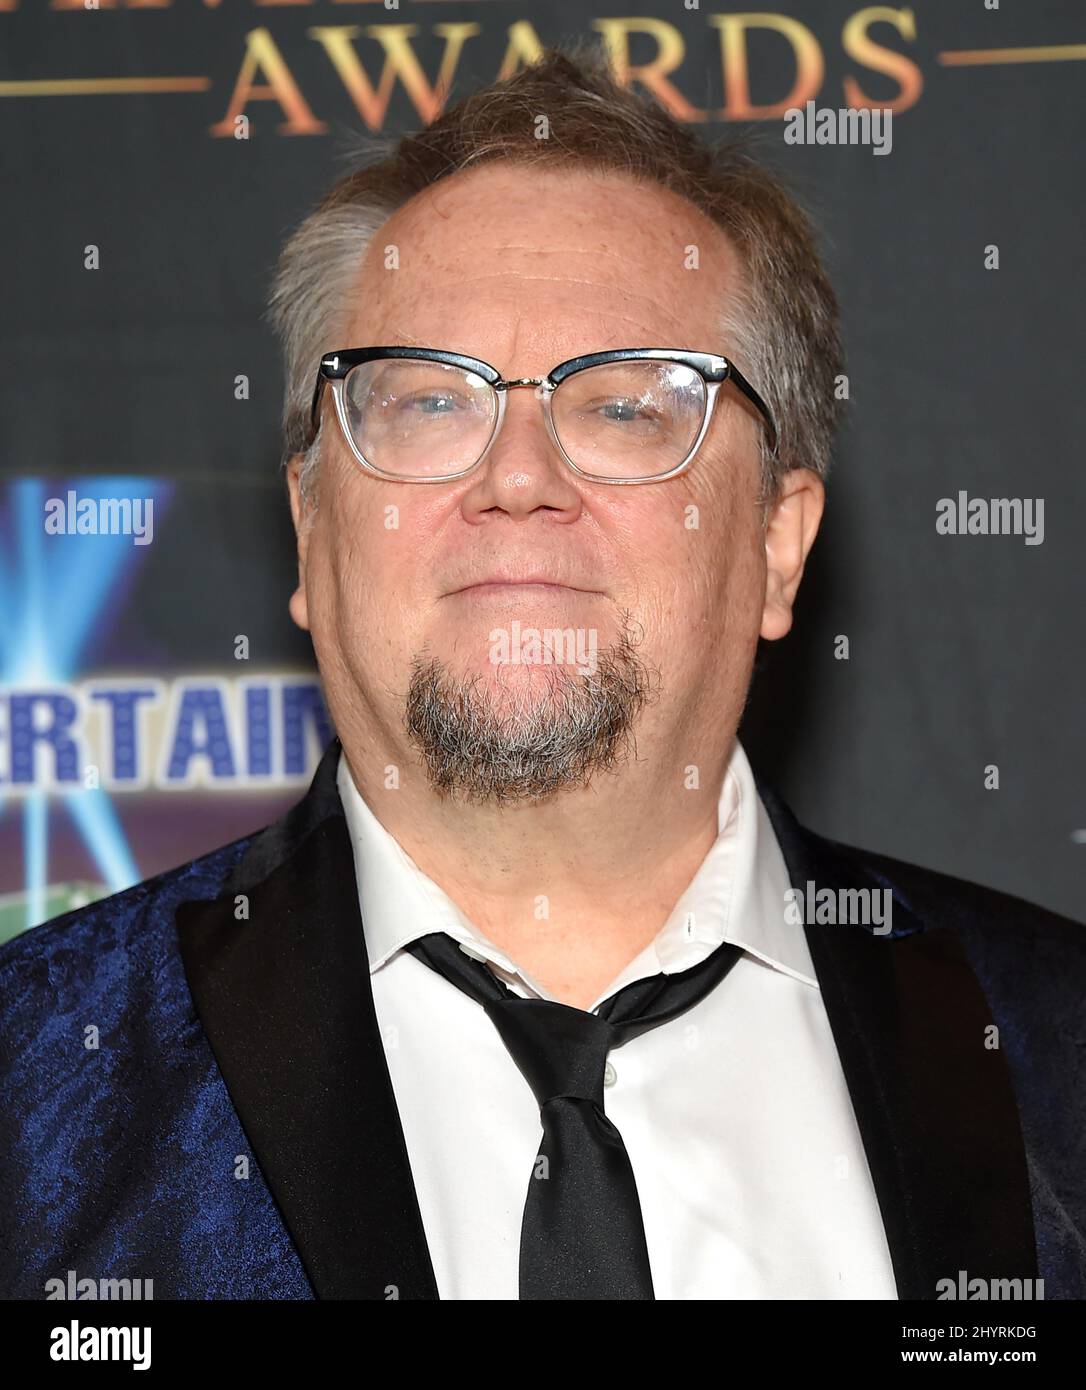 Robbie Rist arriving to the 24th Annual Family Film Awards at Universal Hilton Hotel, California, USA on Wednesday March 24, 2021. Stock Photo